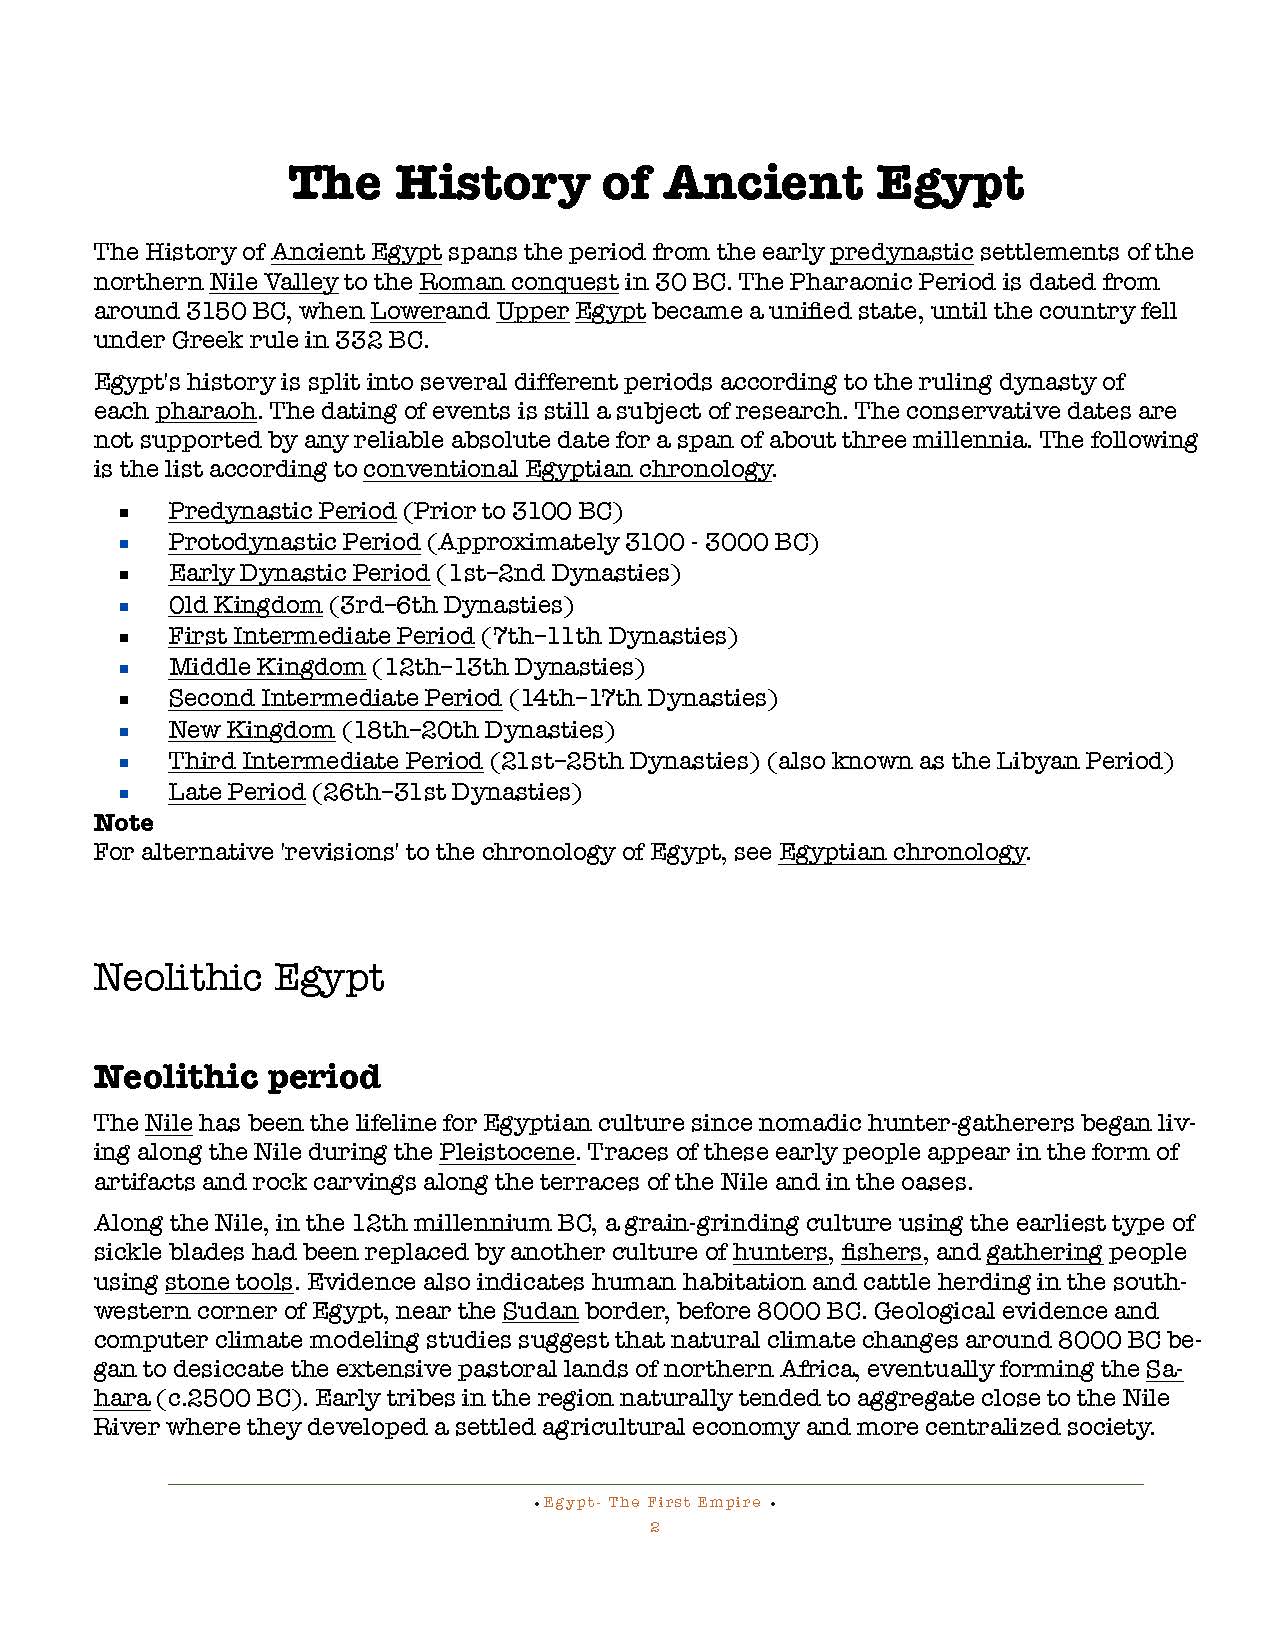 HOCE- Egypt  (First Empire) Notes_Page_002.jpg